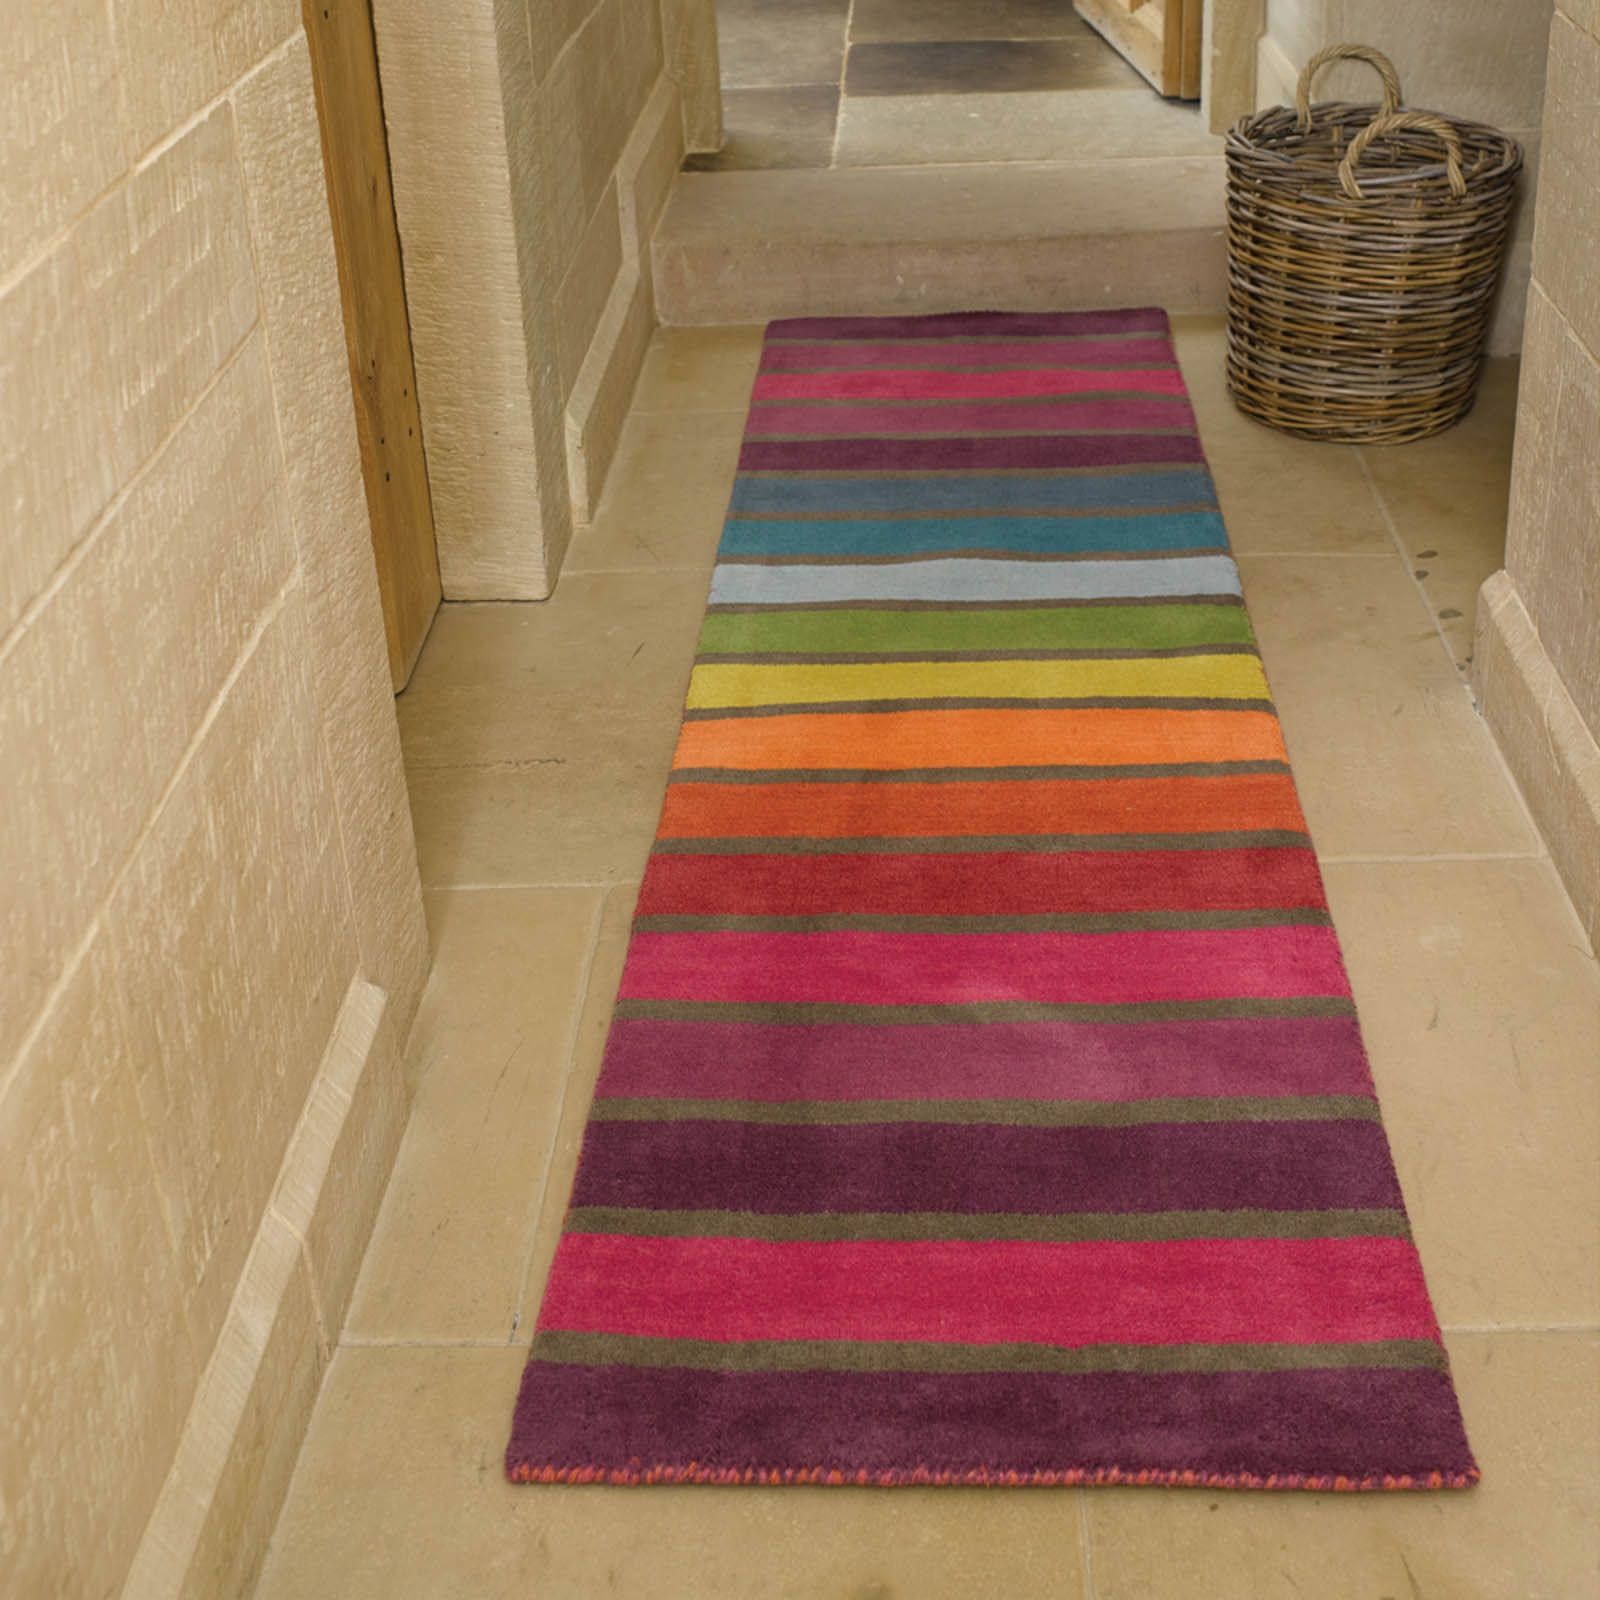 Cheap Runner Rugs Hallway Roselawnlutheran In Cheap Rug Runners For Hallways (Photo 1 of 20)